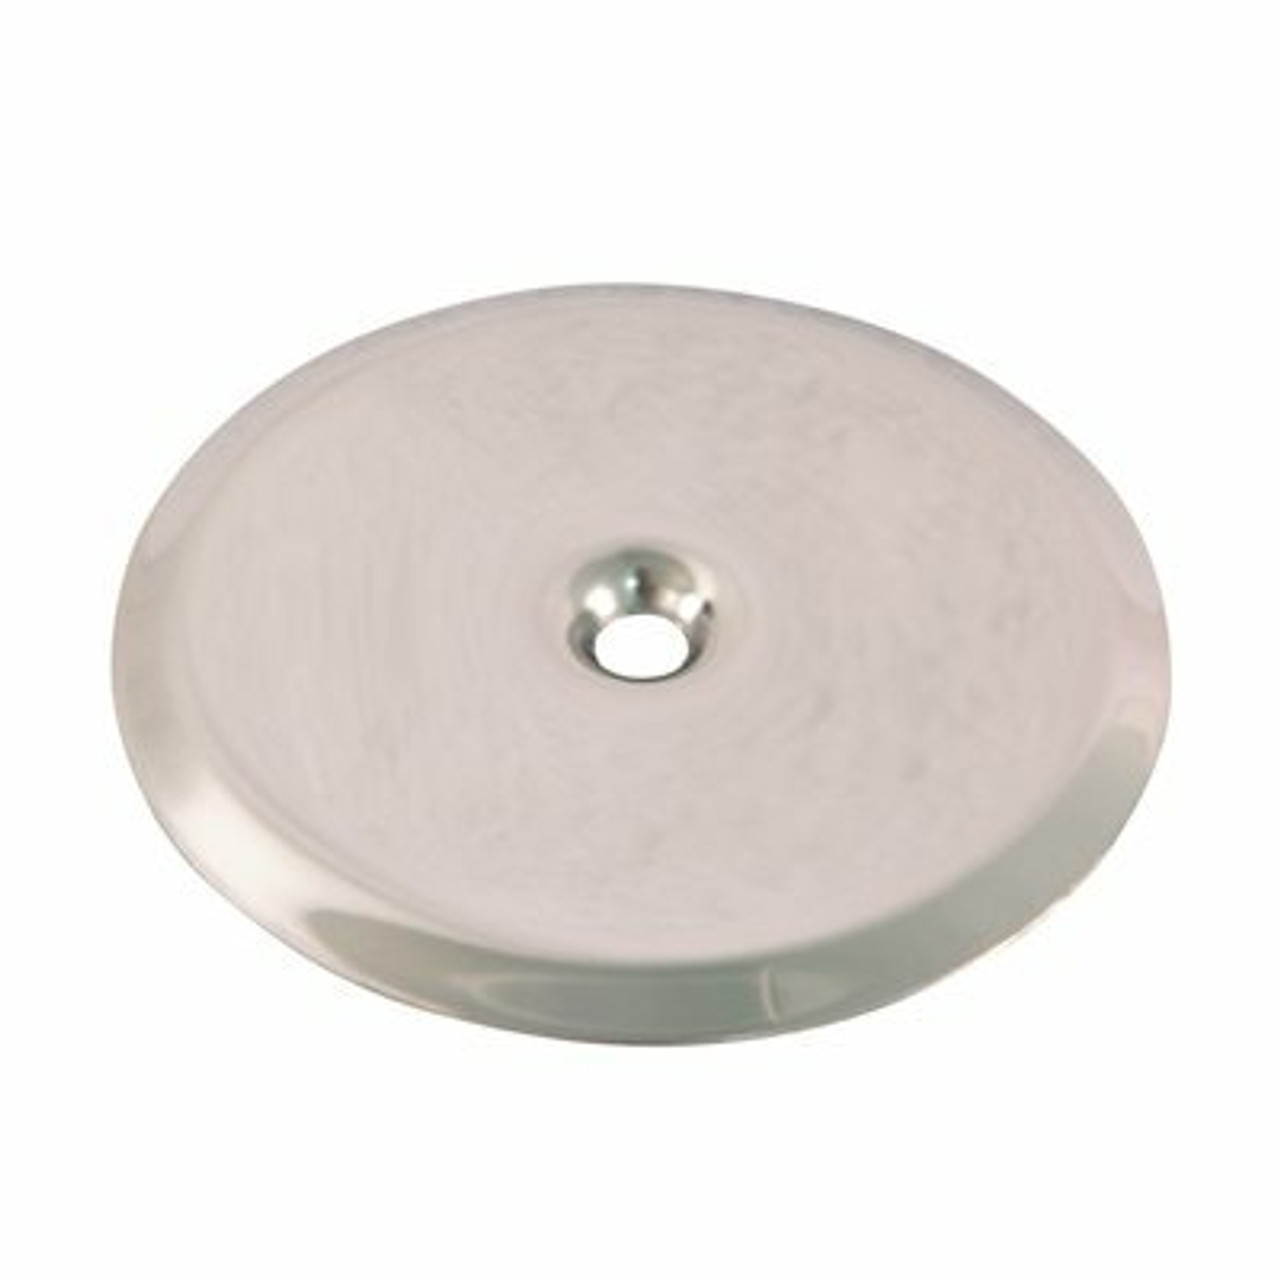 Proplus 8 In. 21 Gauge Stainless Steel Cleanout Cover